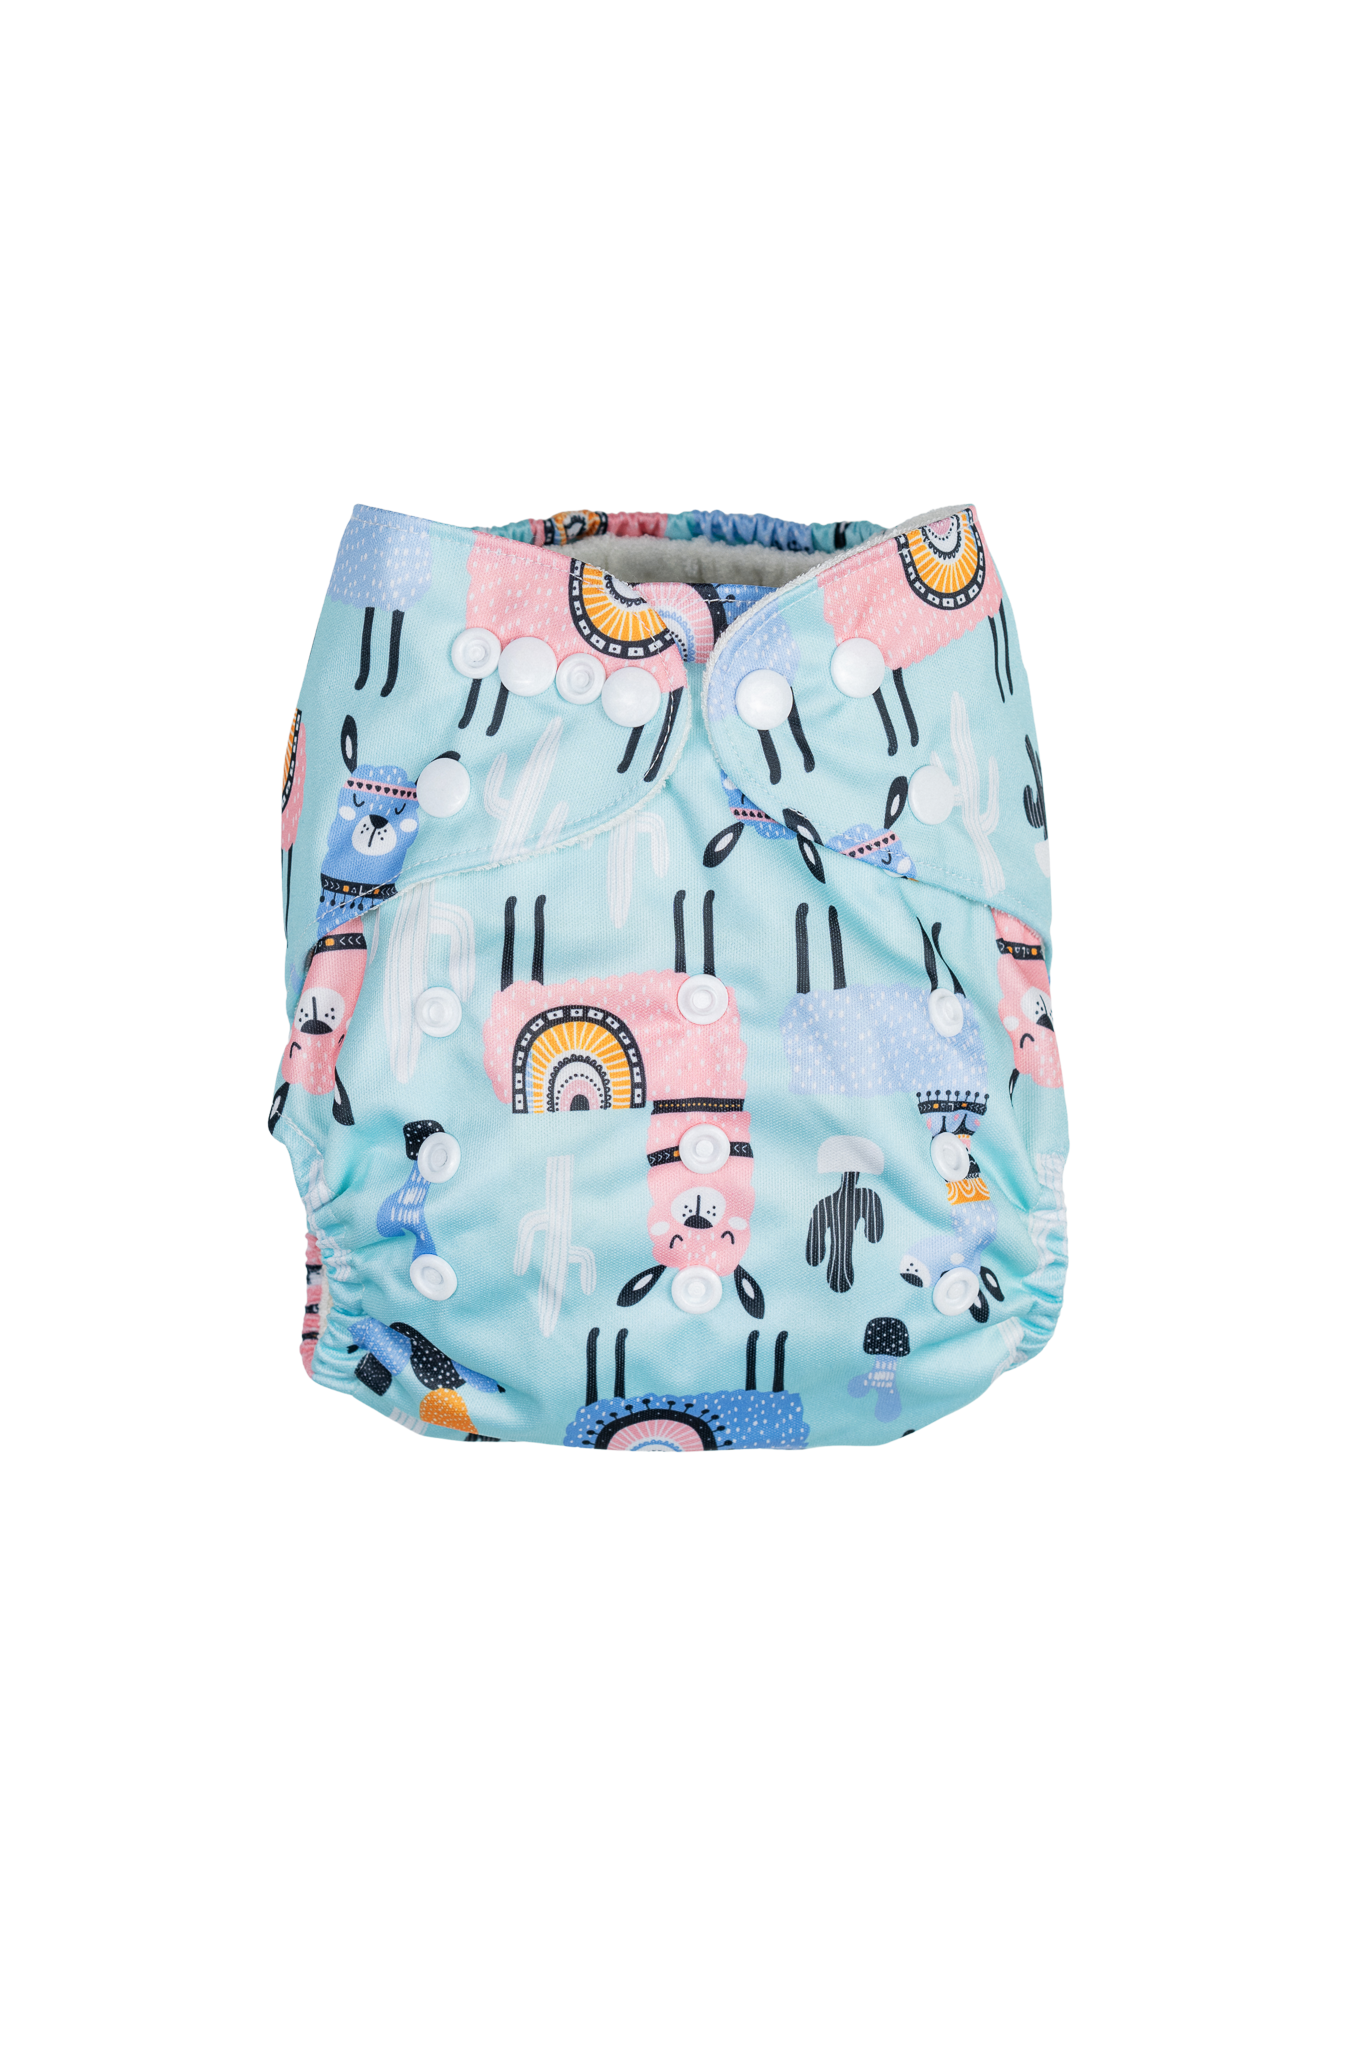 Bamboo Size-Adjustable Cloth Nappy - Smiling Llama,Bamboo Size-Adjustable Cloth Nappy - Smiling Llama